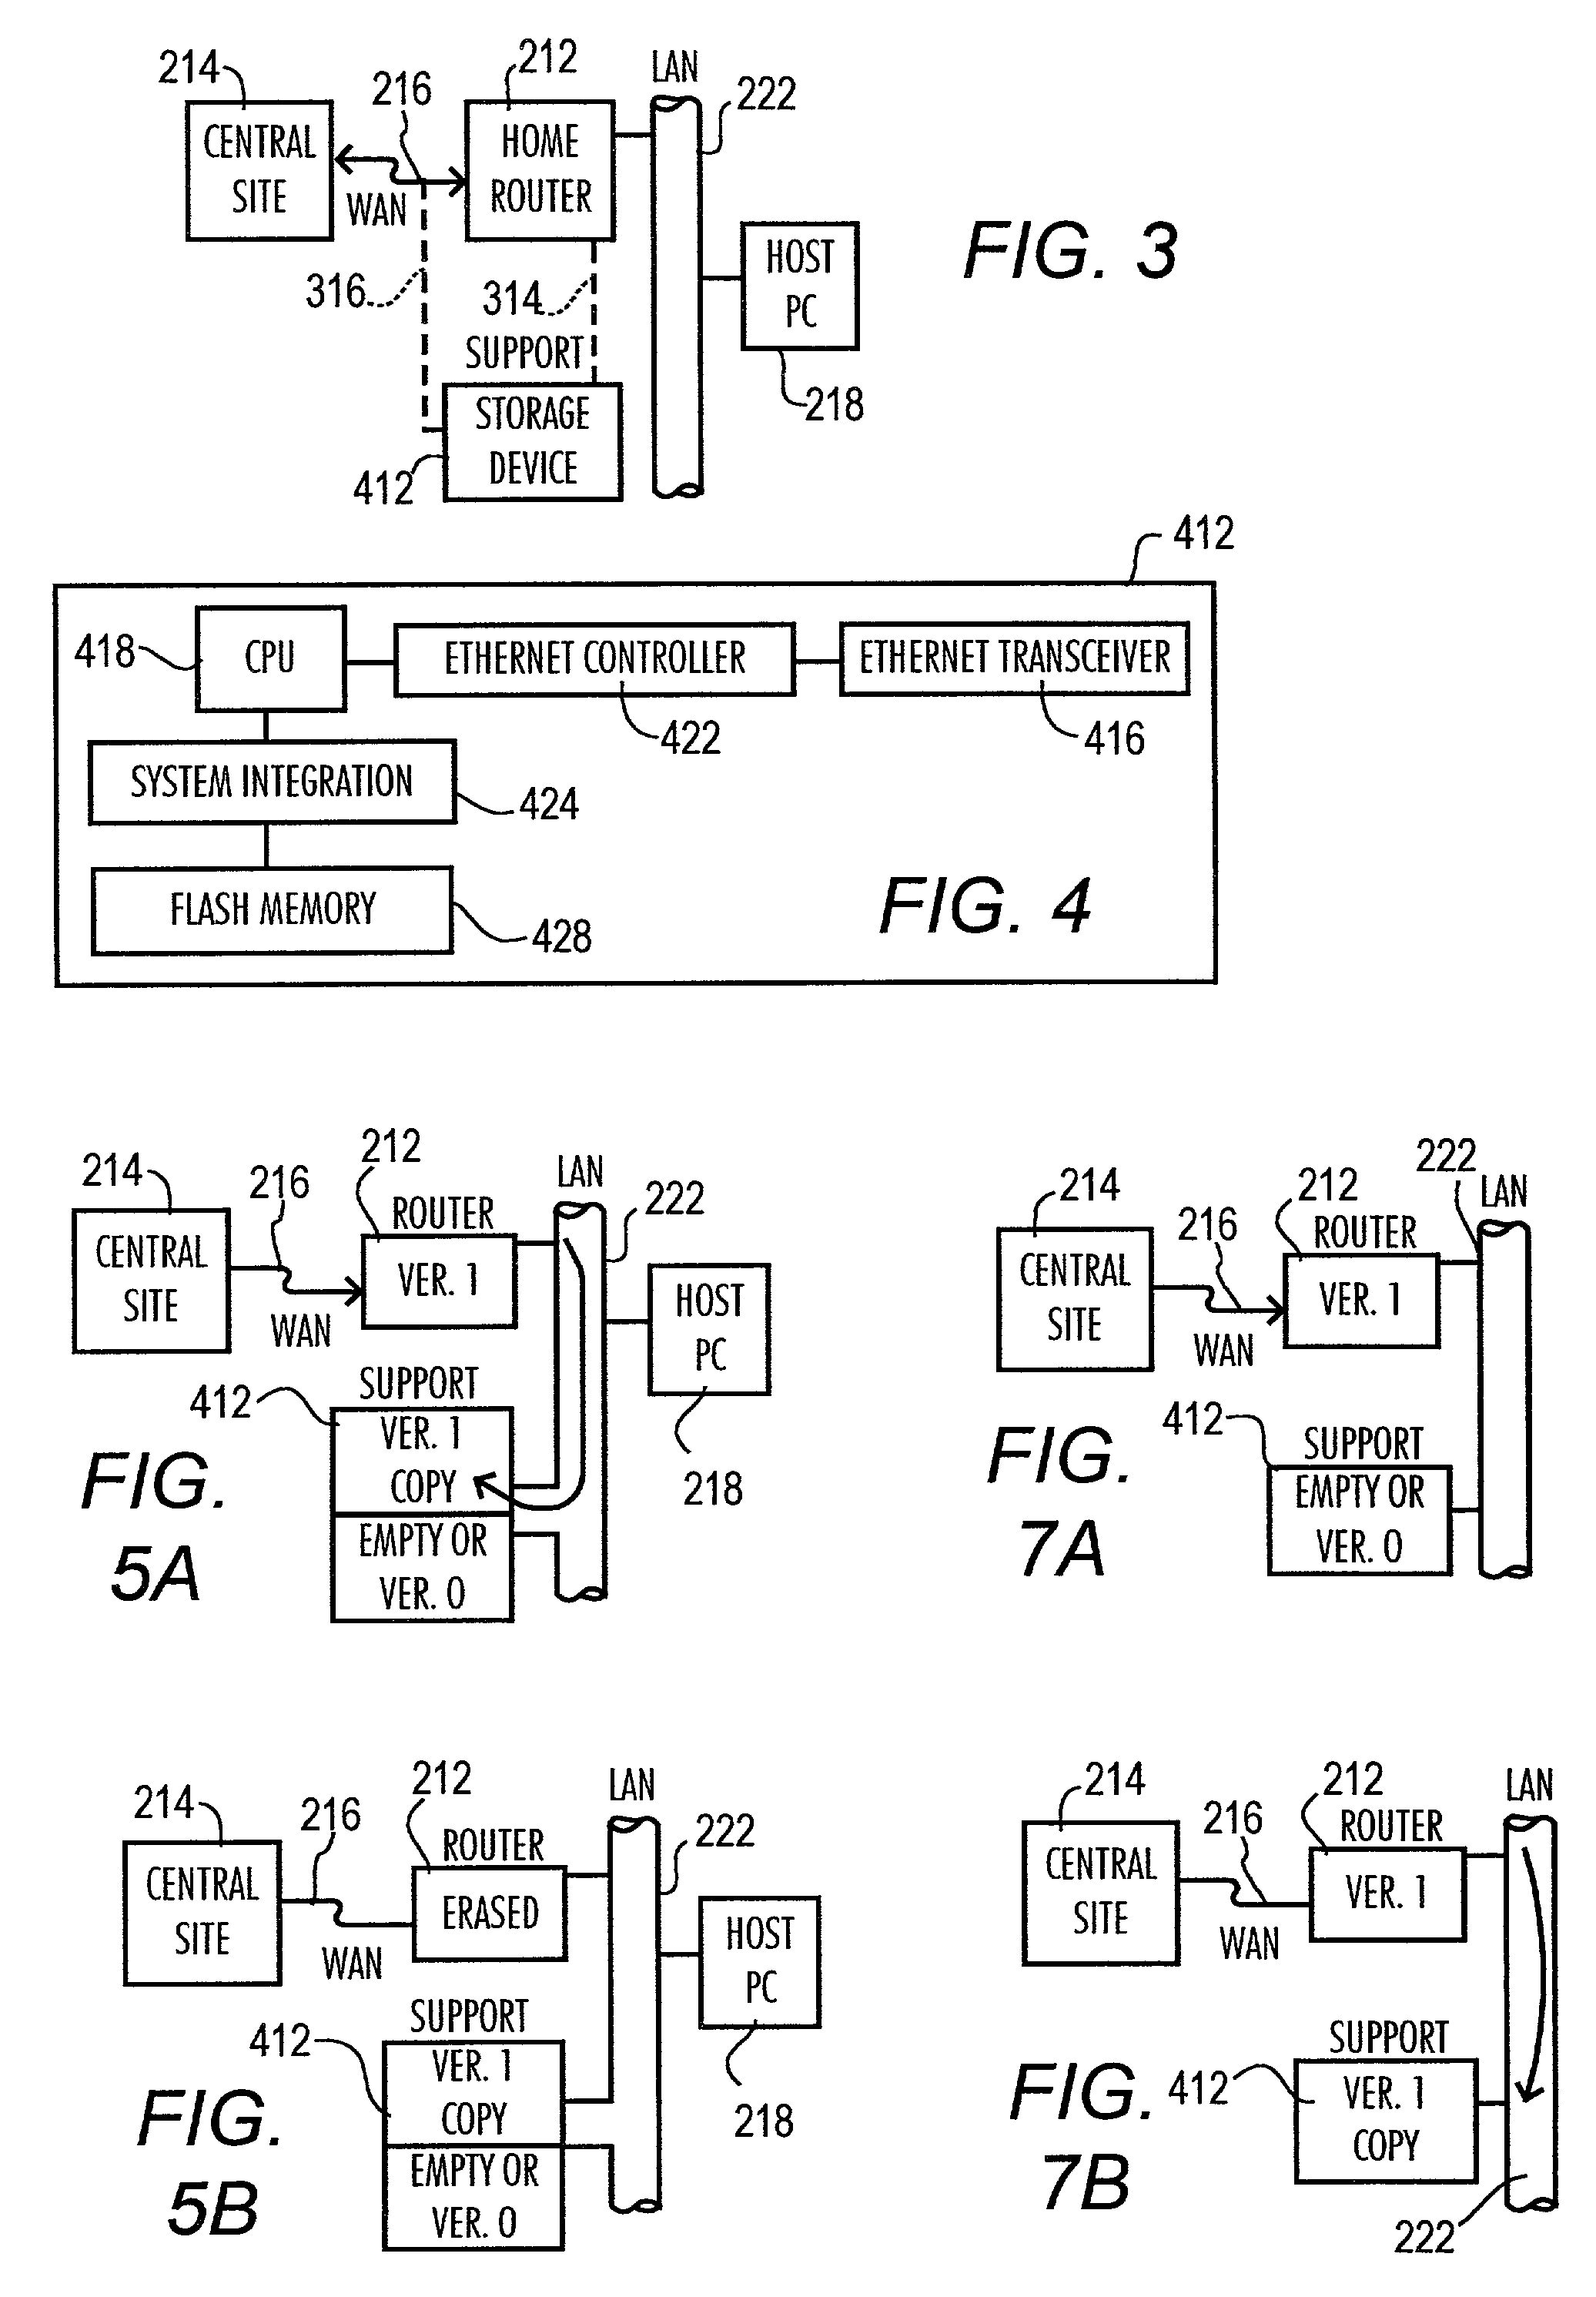 Router image support device